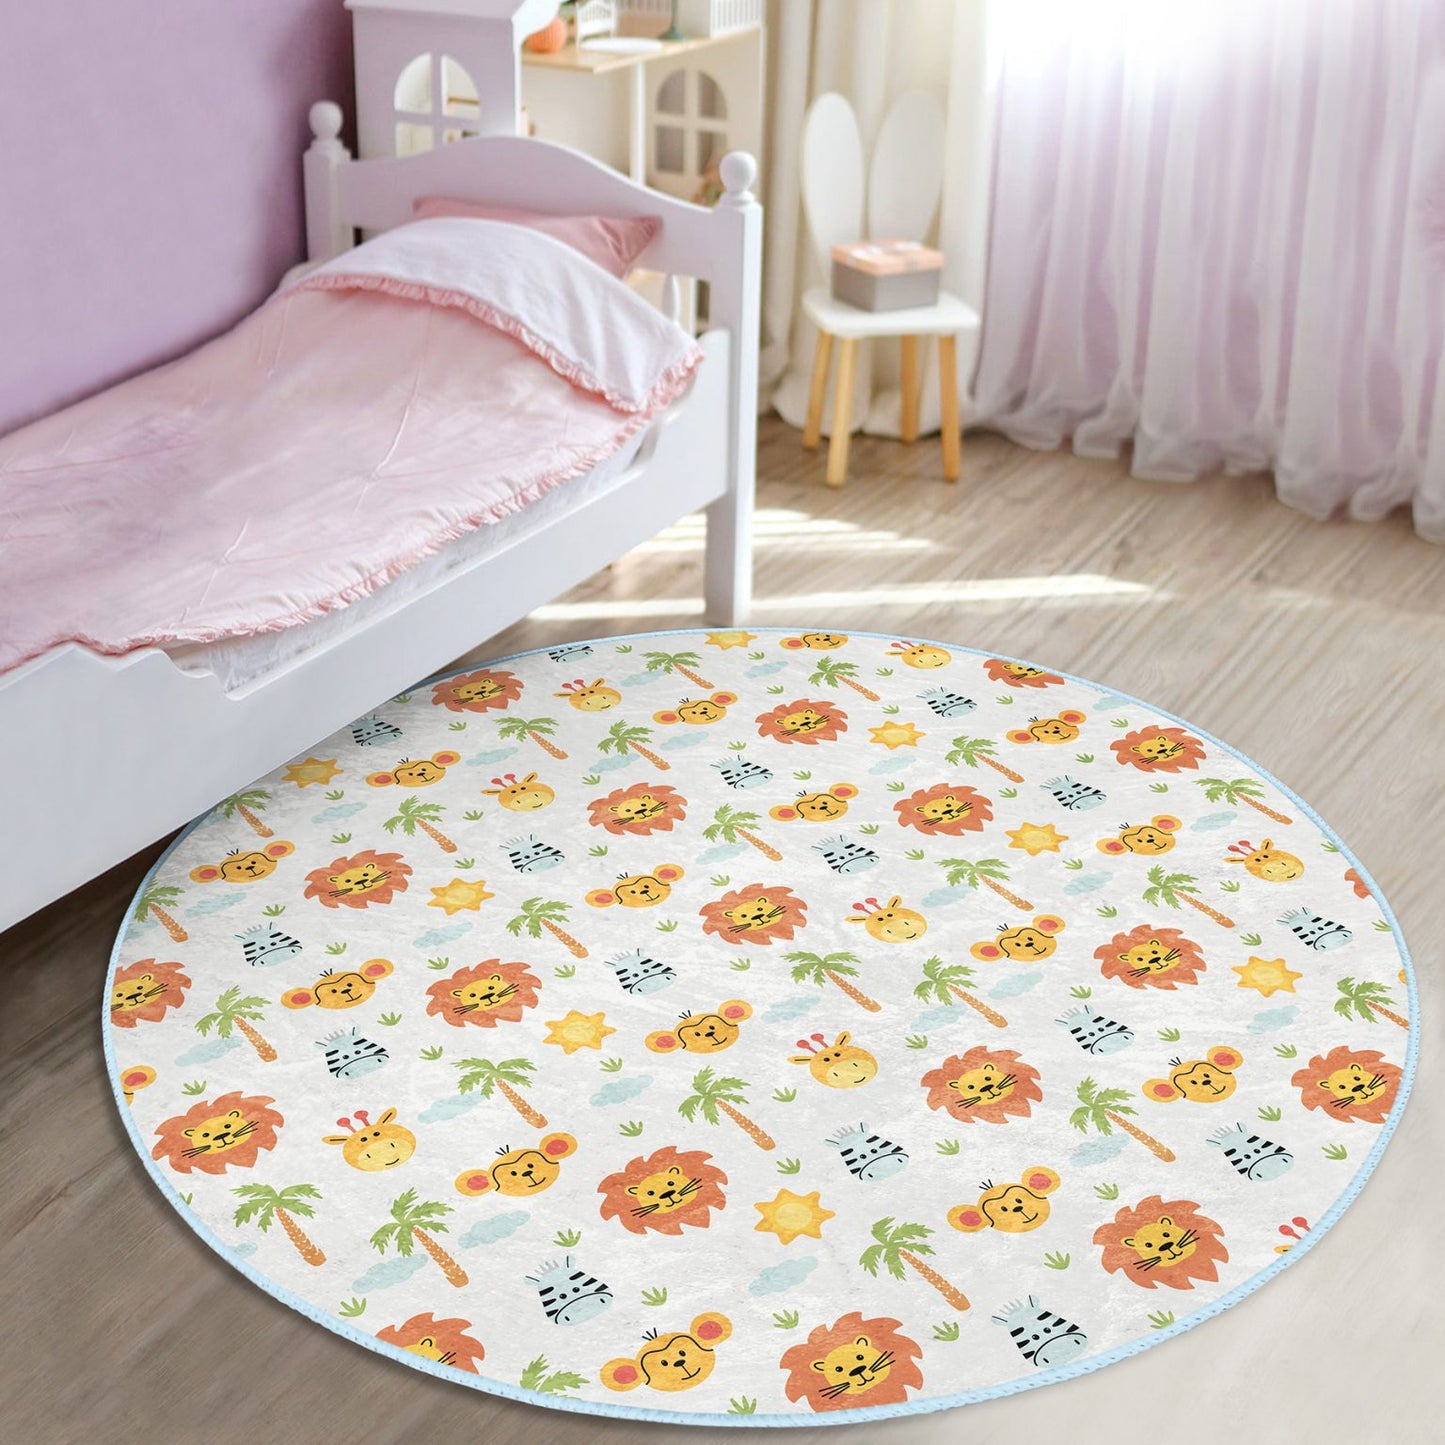 Playful Kids Room Rug featuring Lions and Monkeys